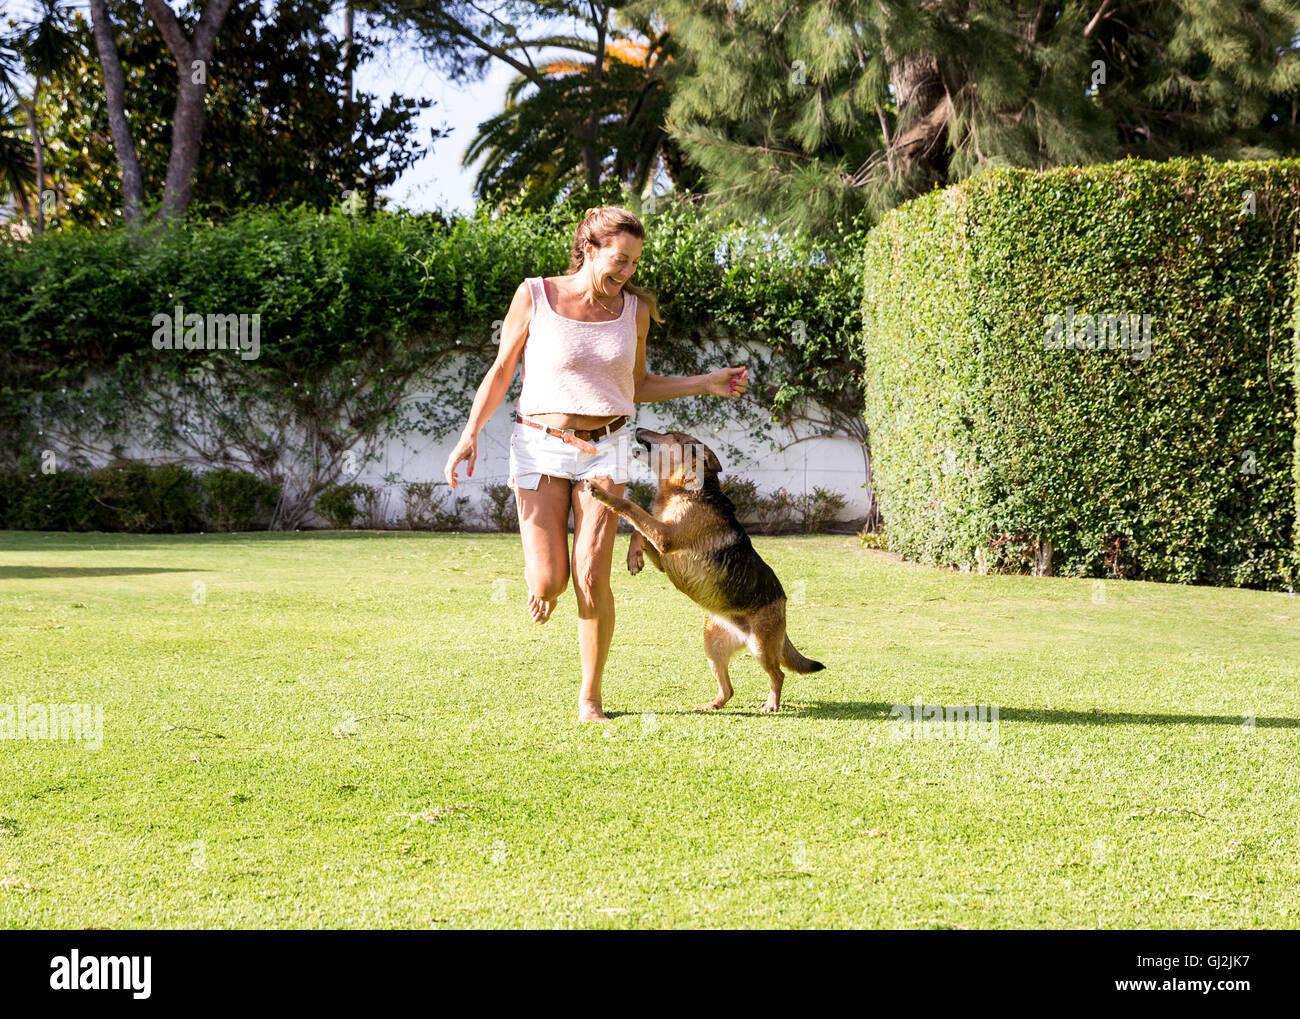 Mature woman running in park with dog Stock Photo